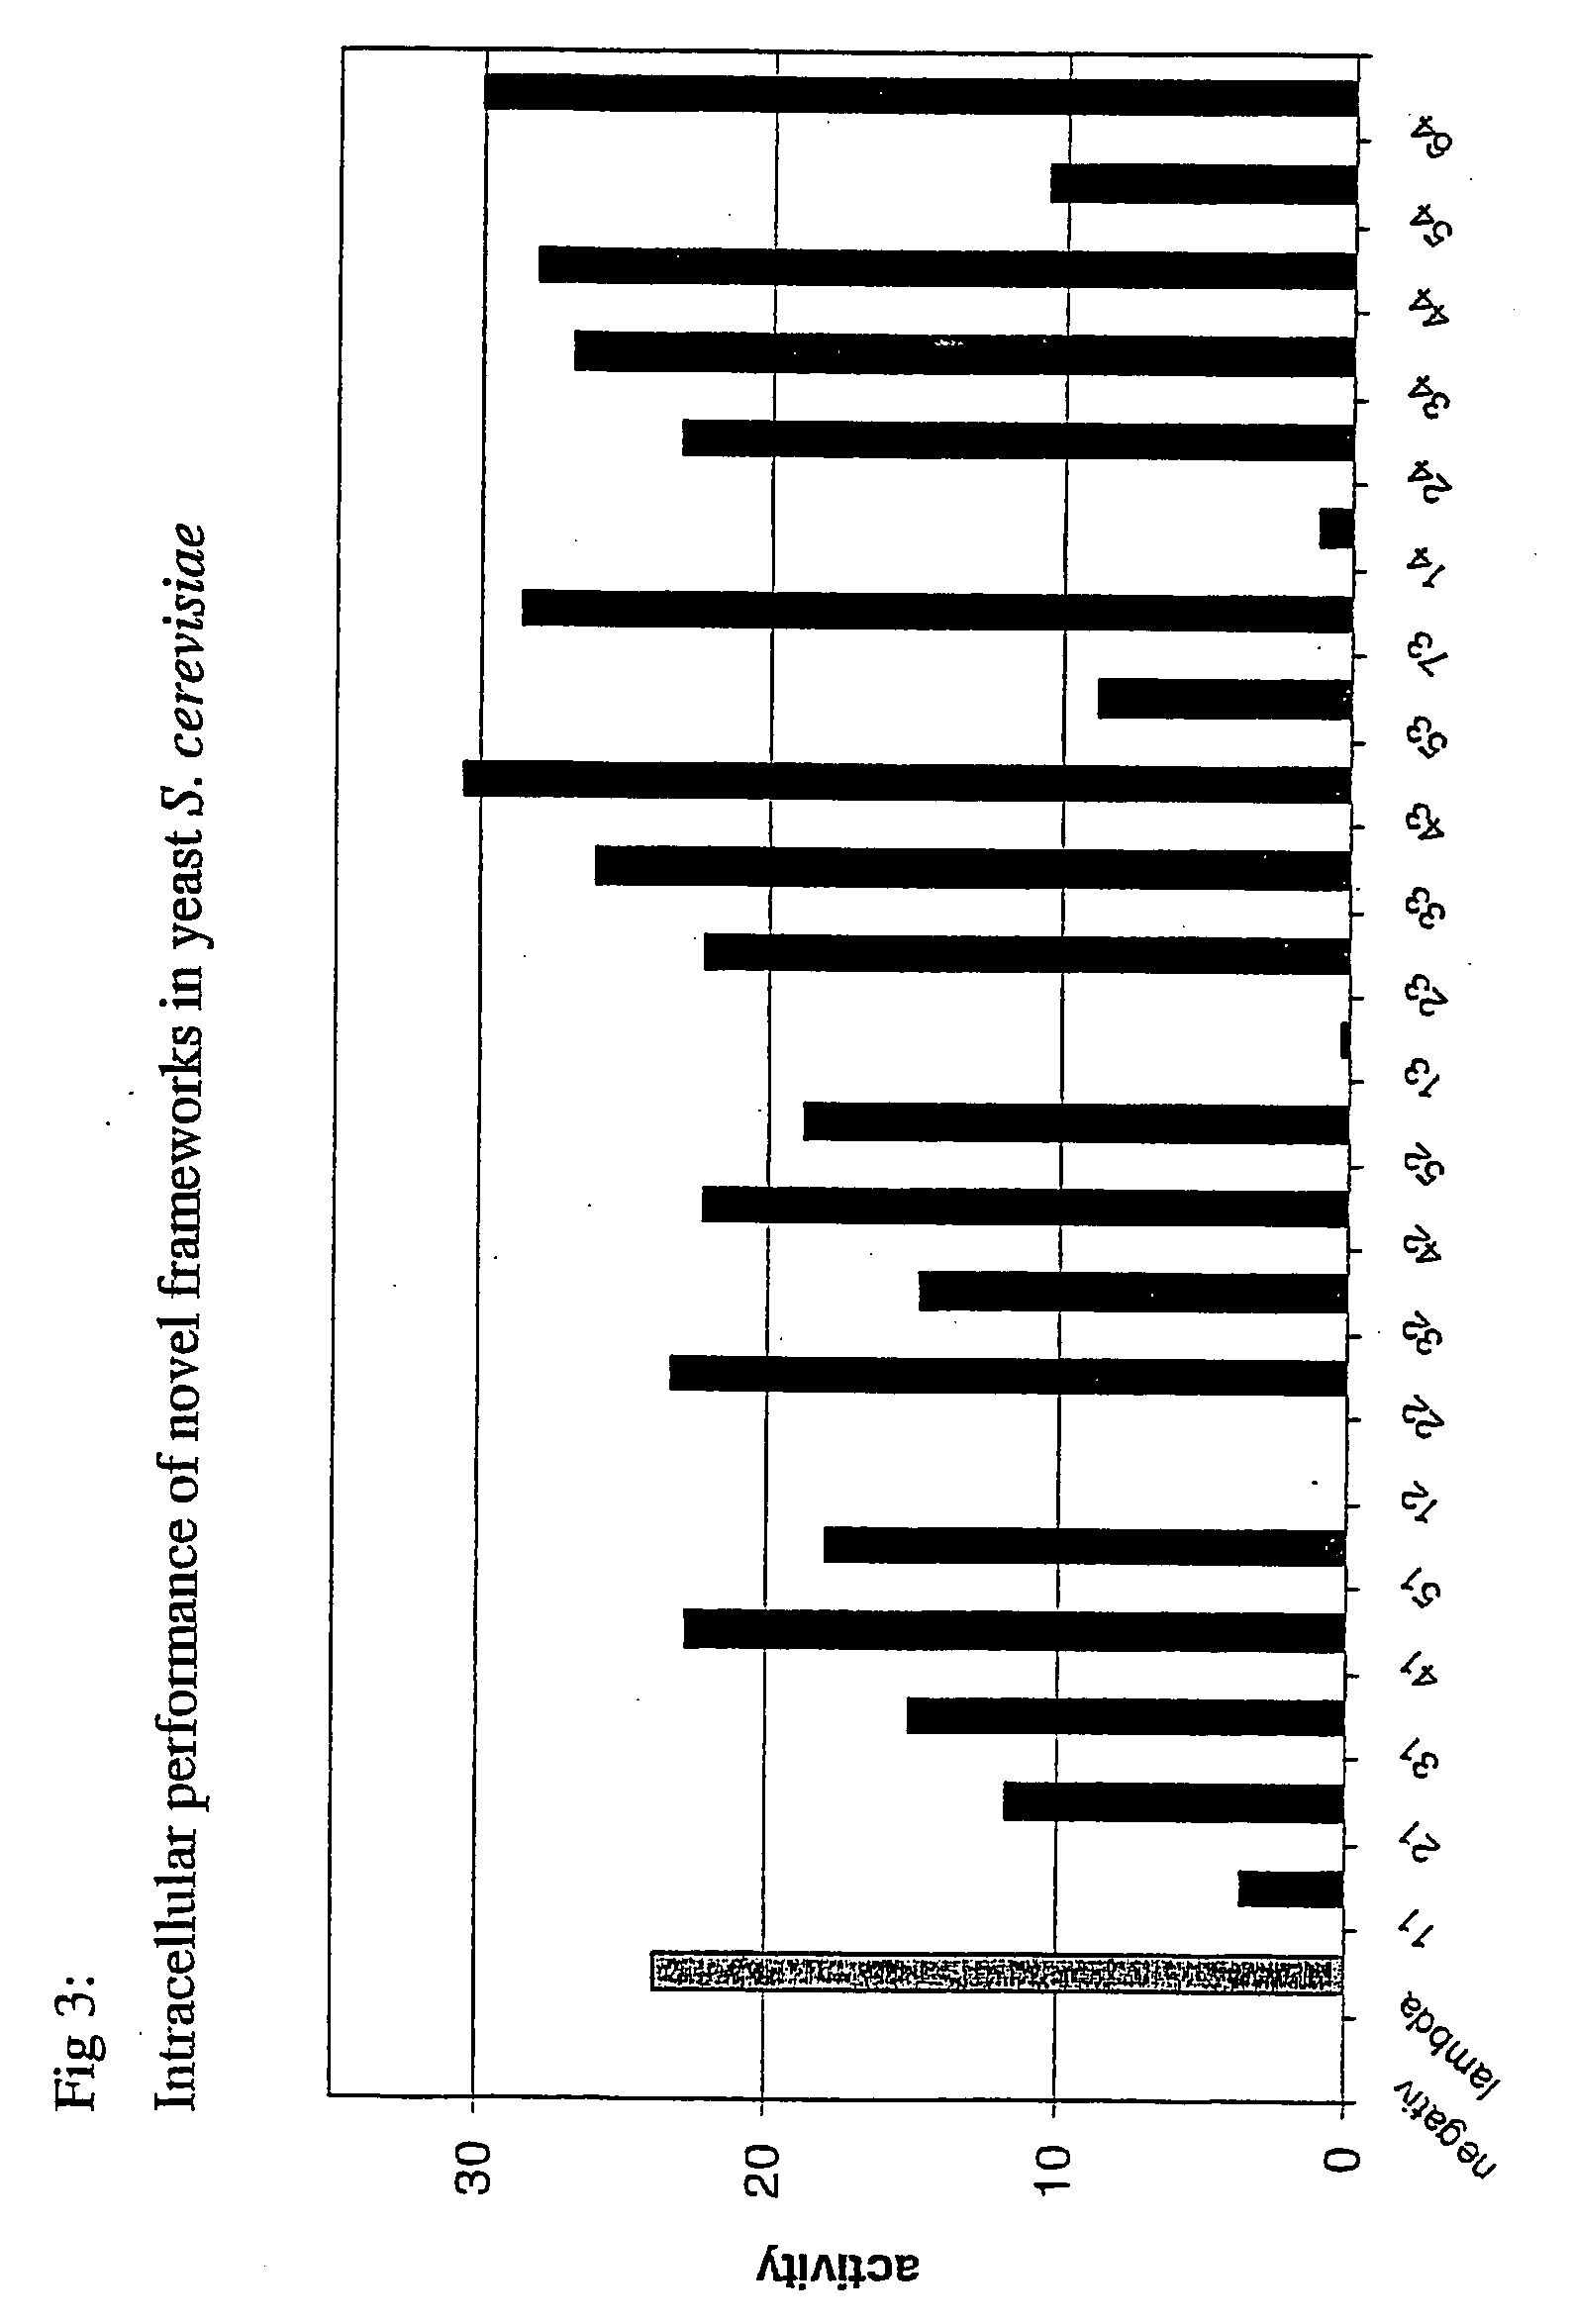 Immunoglobulin frameworks which demonstrate enhanced statbility in the intracellular envioronment and methods of identifying same